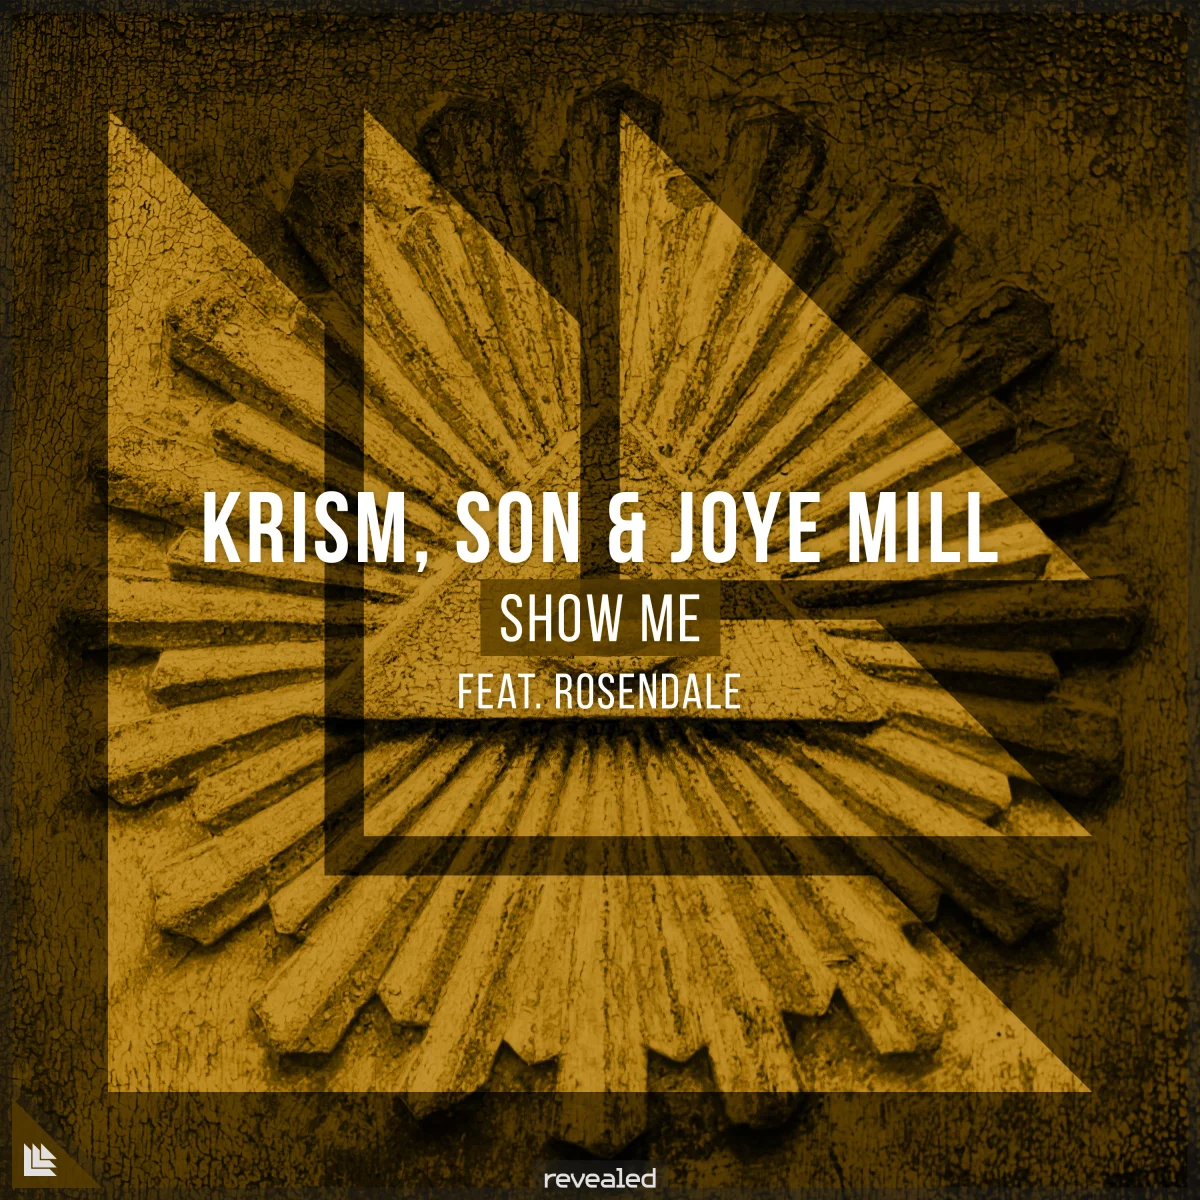 Show Me - KRISM⁠, SON OFFICIAL⁠ & Joye Mill⁠ feat. Rosendale⁠ 